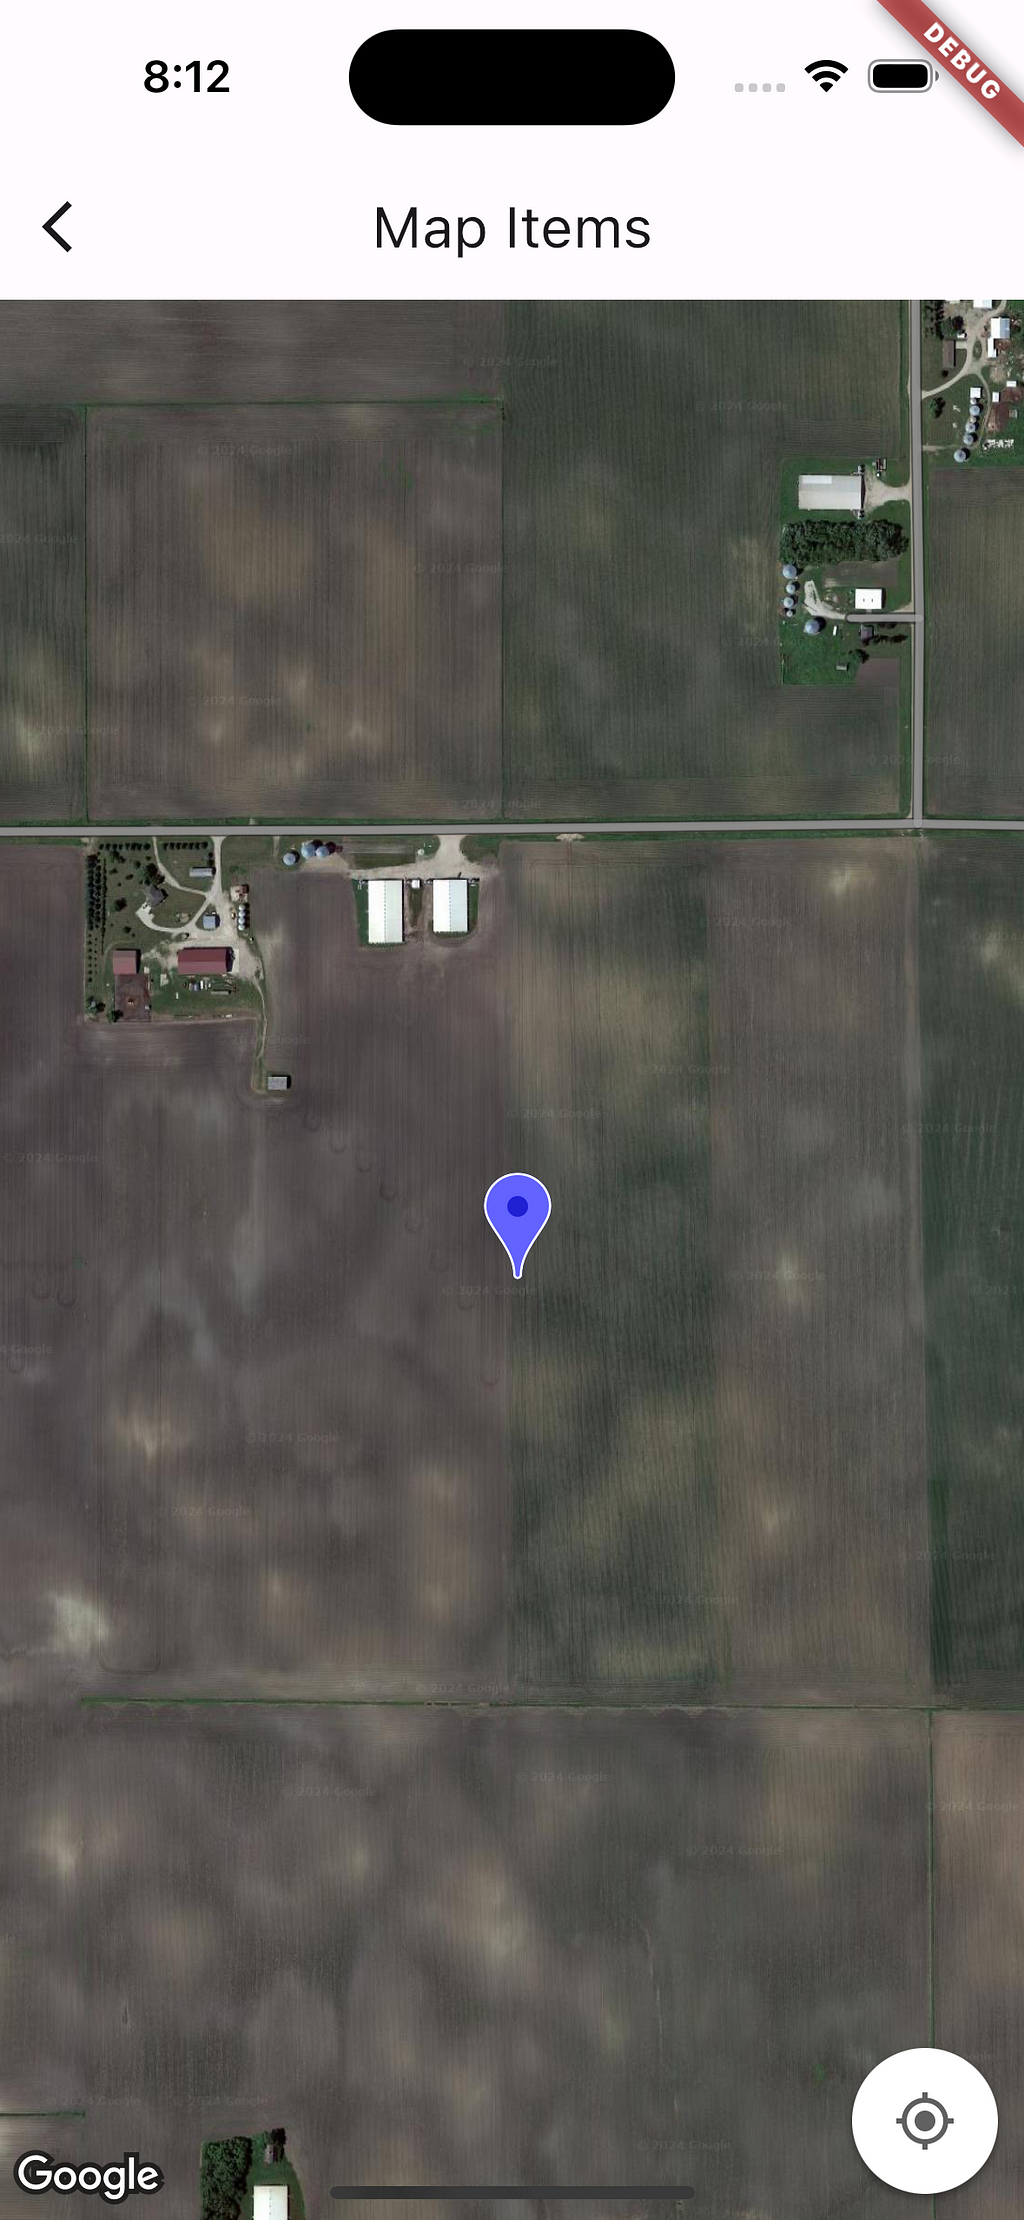 A screenshot of a map open on a smartphone. The map is showing satellite image of a farm in Northern part of USA. A marker is shown on the map. The colour of the marker is purple.